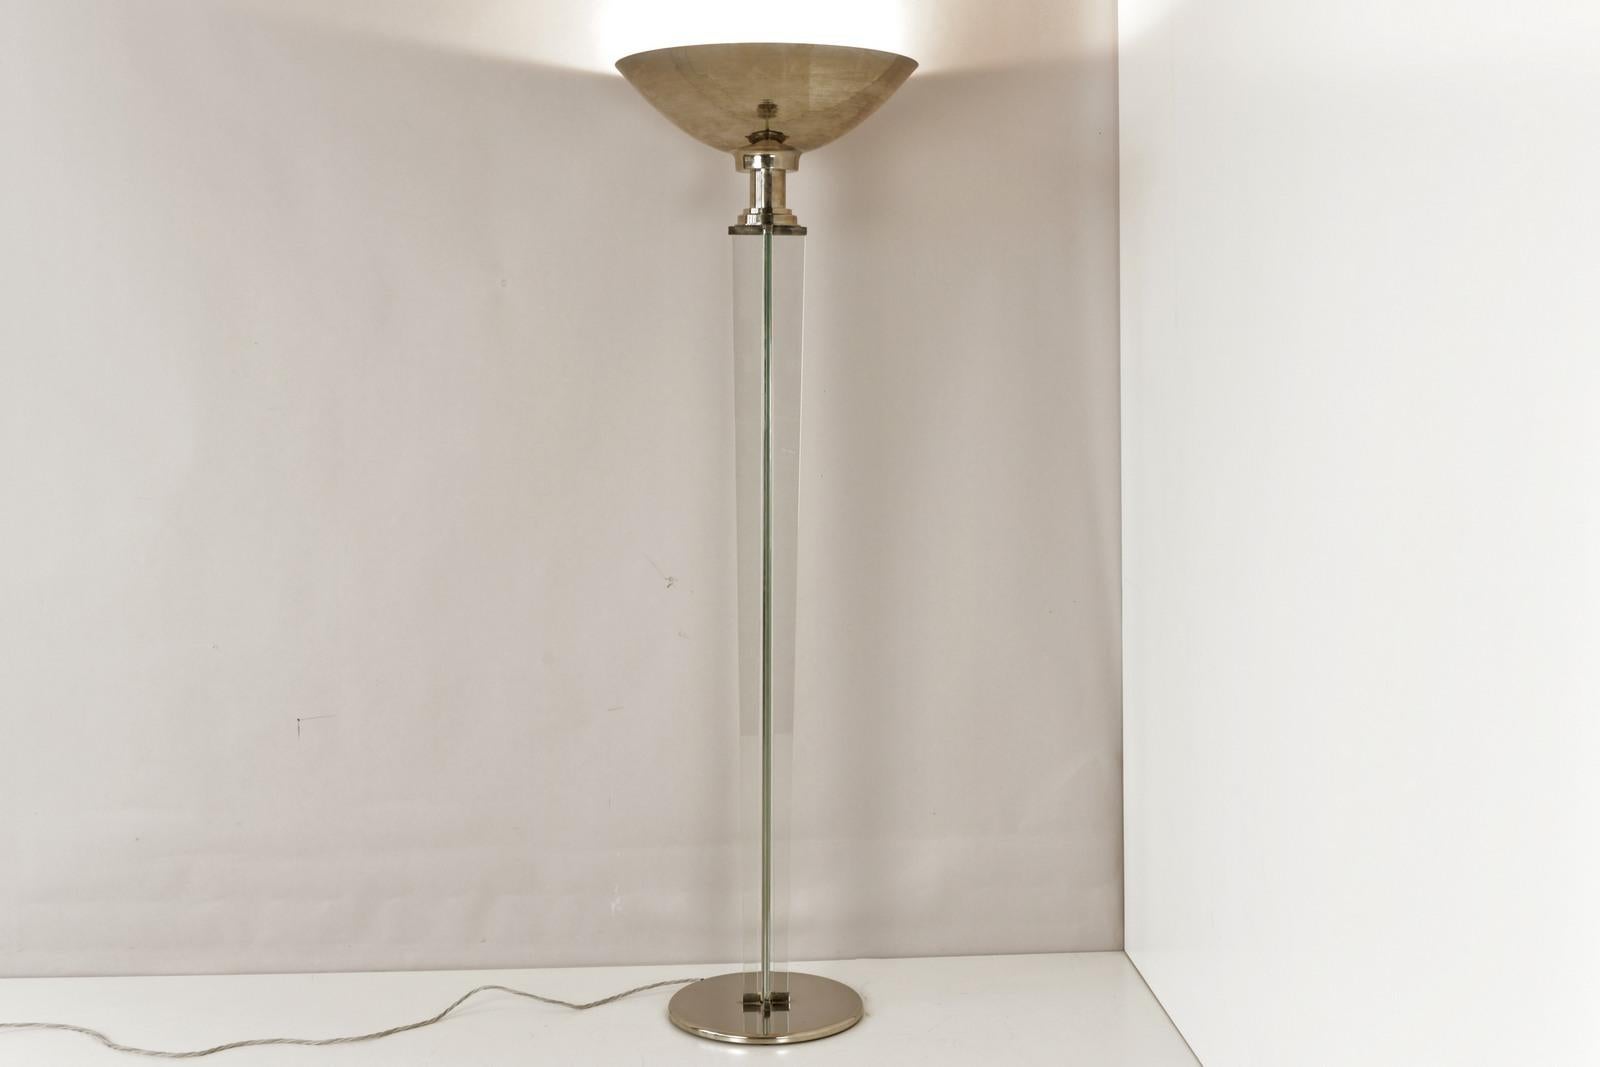 French Art Deco Metal and Glass Floor Lamp, France - 1940s  For Sale